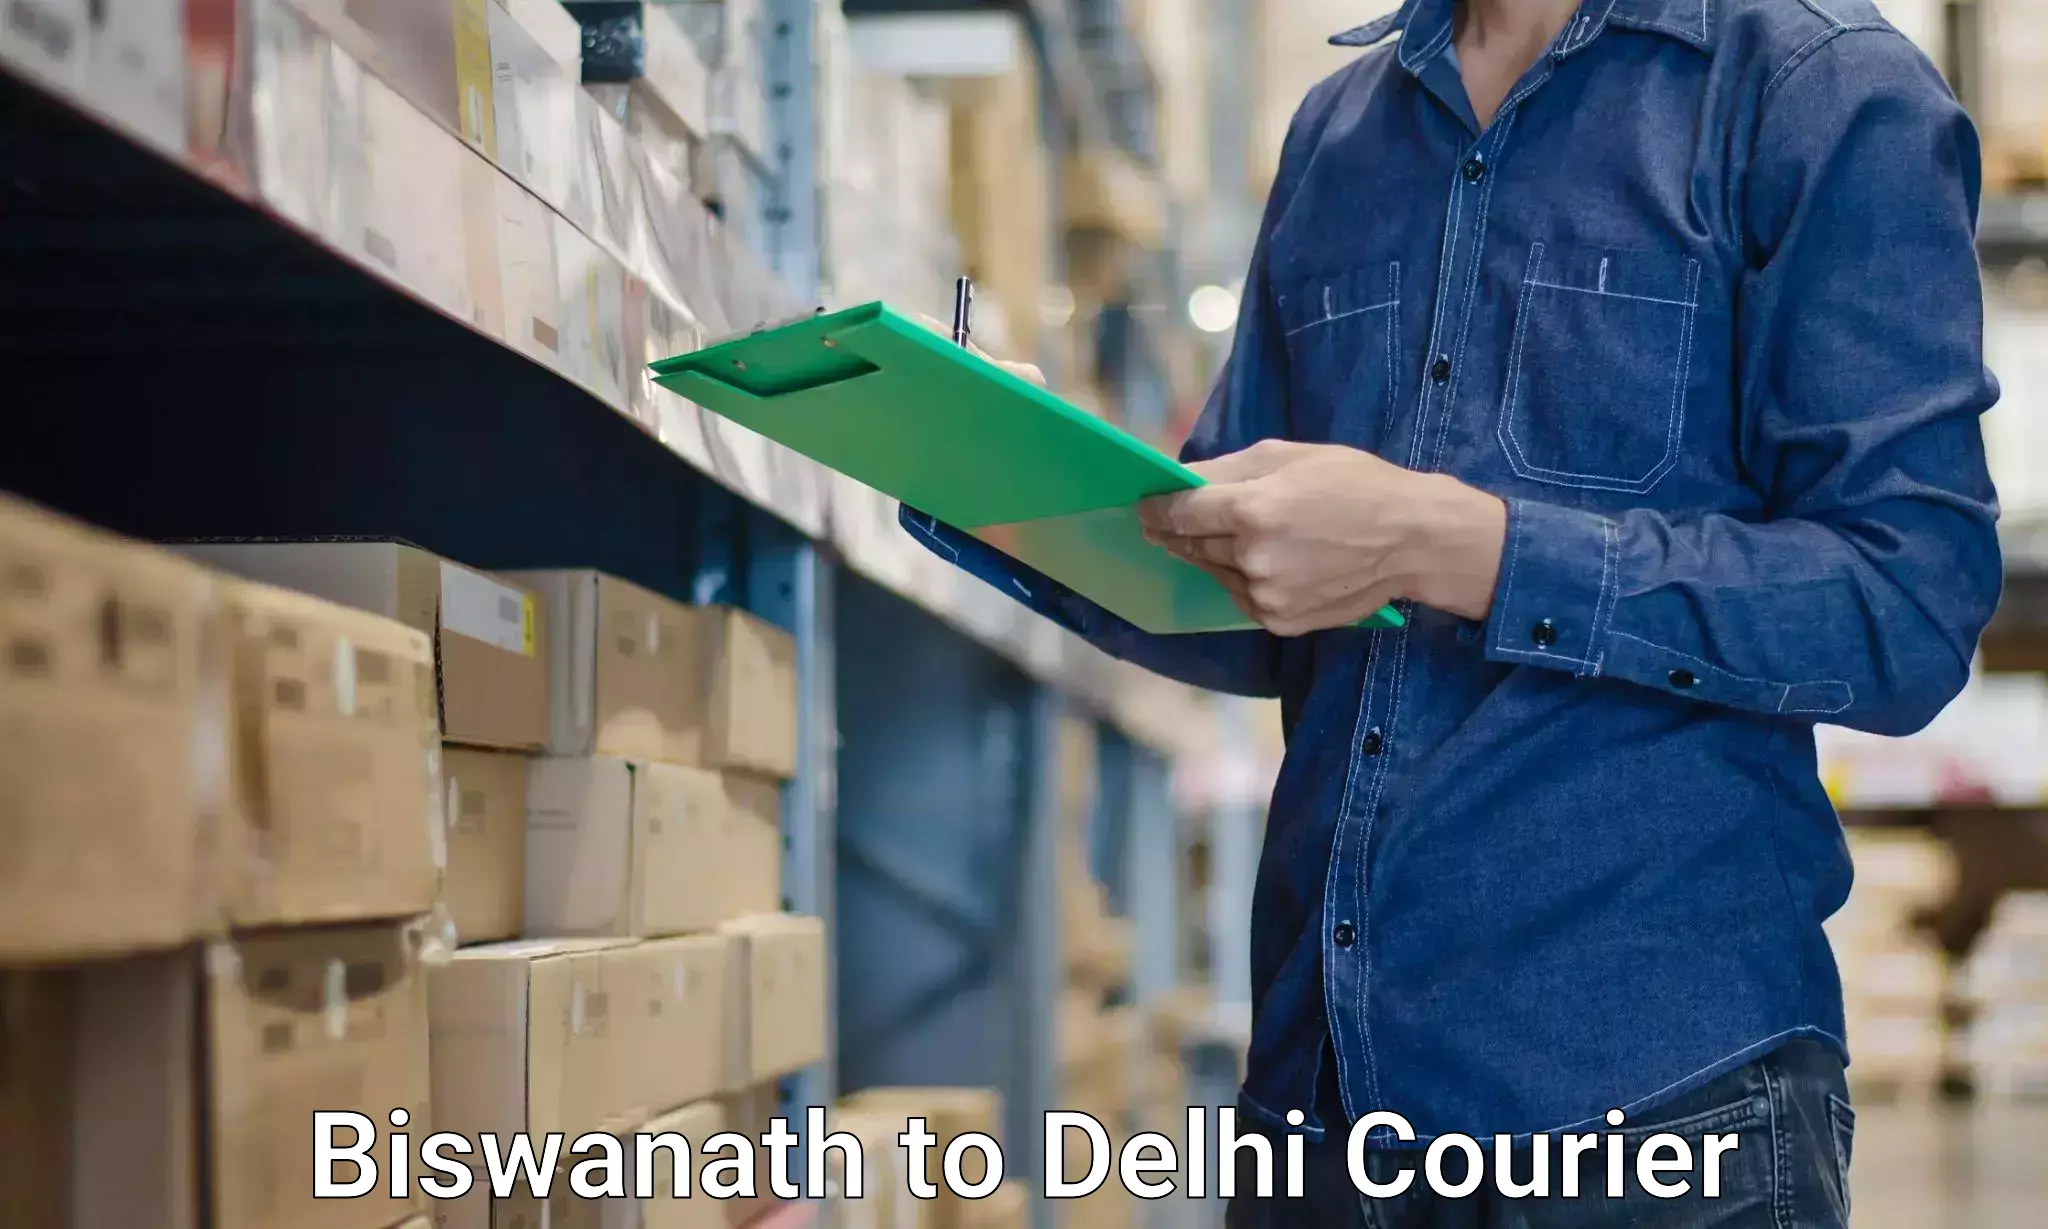 Quality relocation services in Biswanath to NCR